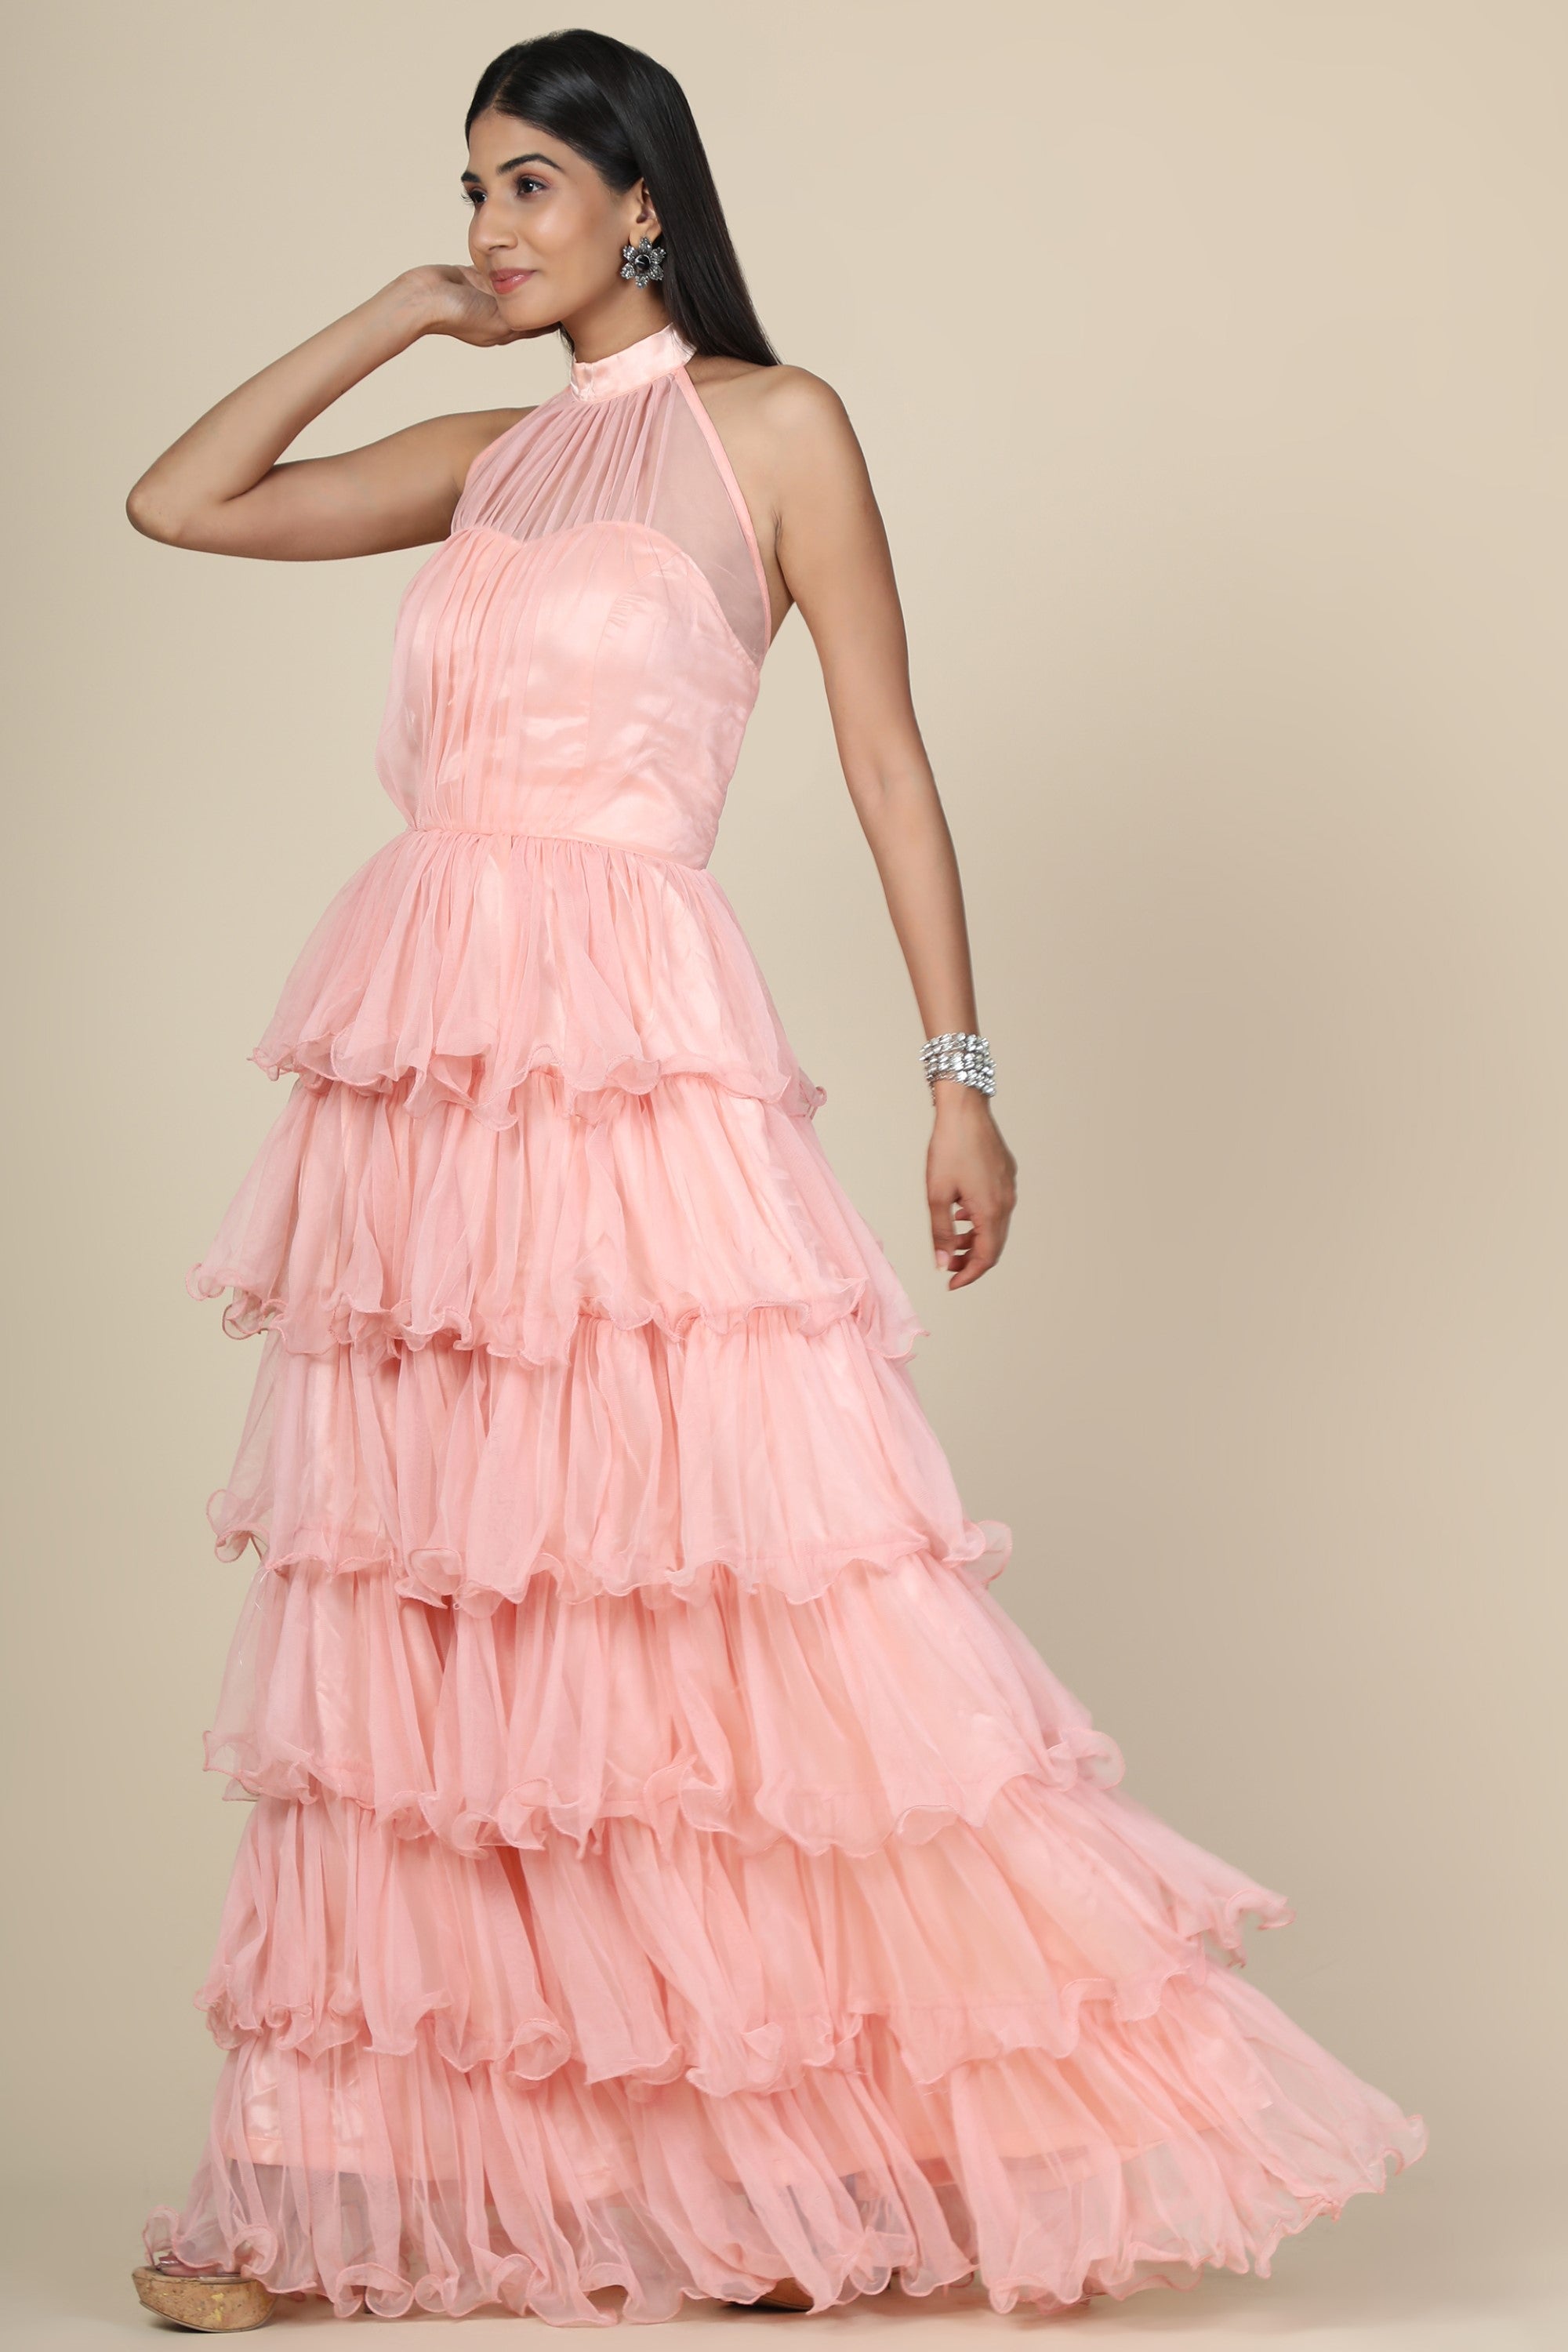 Women's Halter Neck Drape Net  Corset Gown In Baby Pink - MIRACOLOS by Ruchi